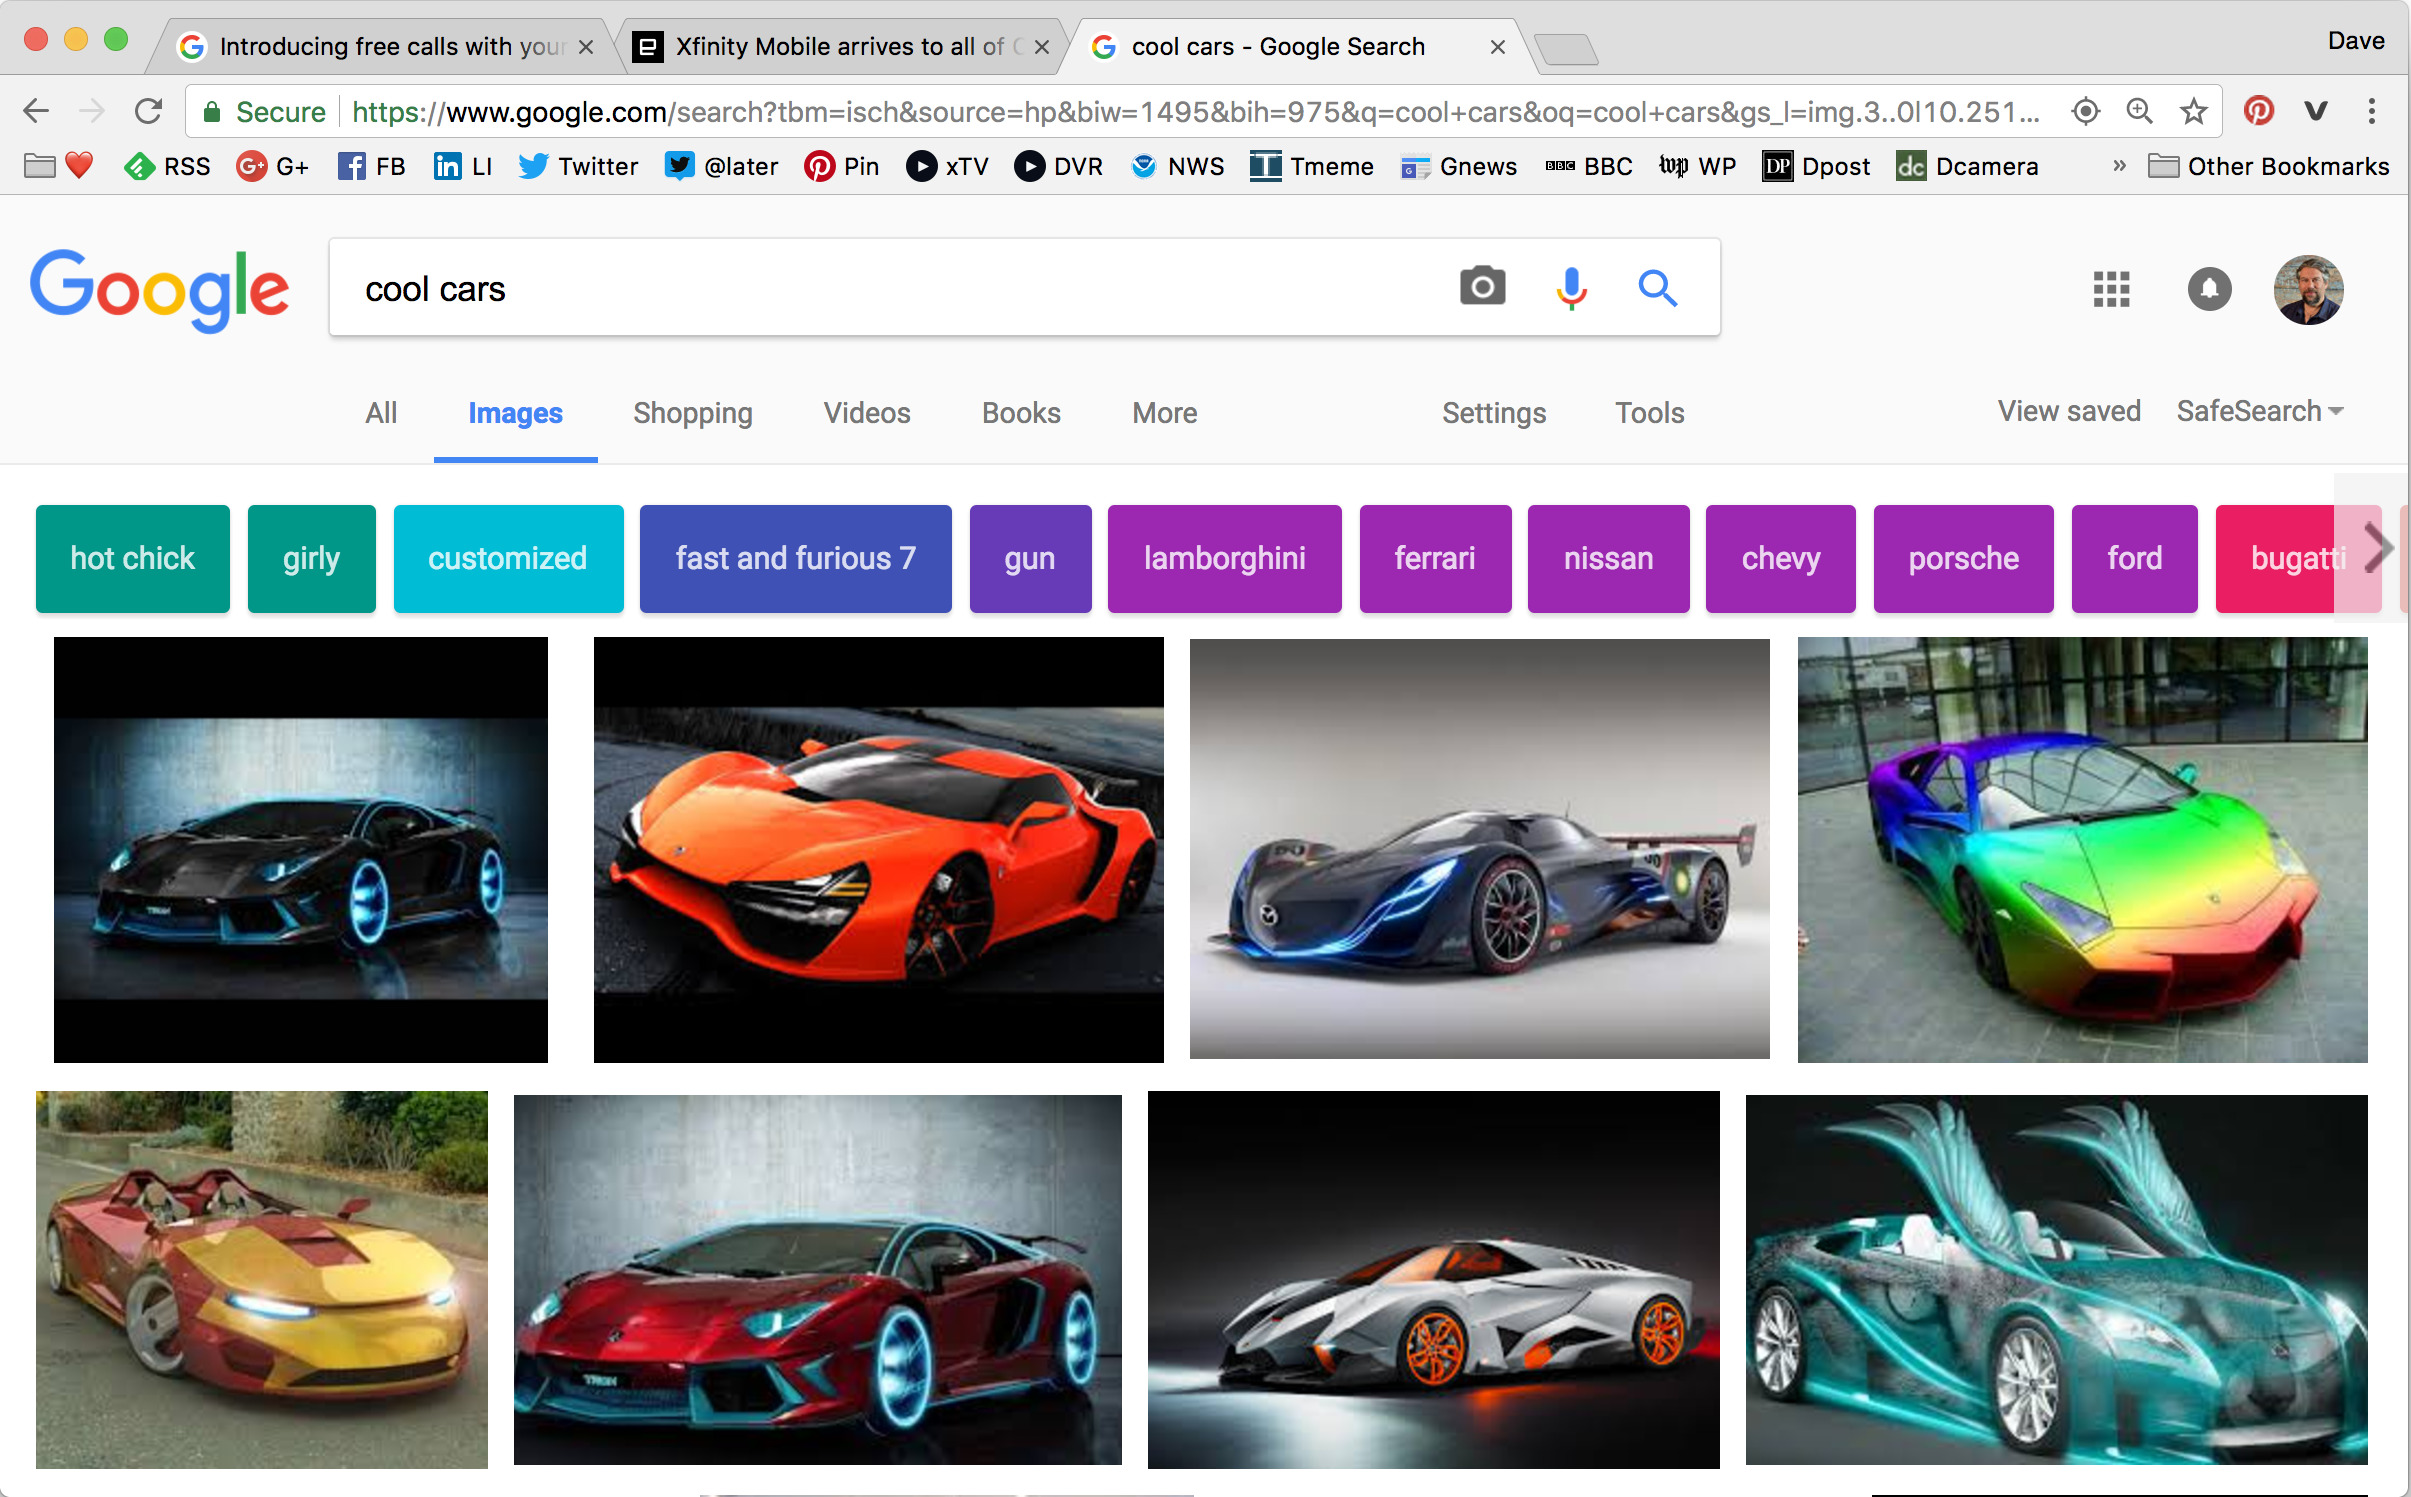 google image search 'cool cars'